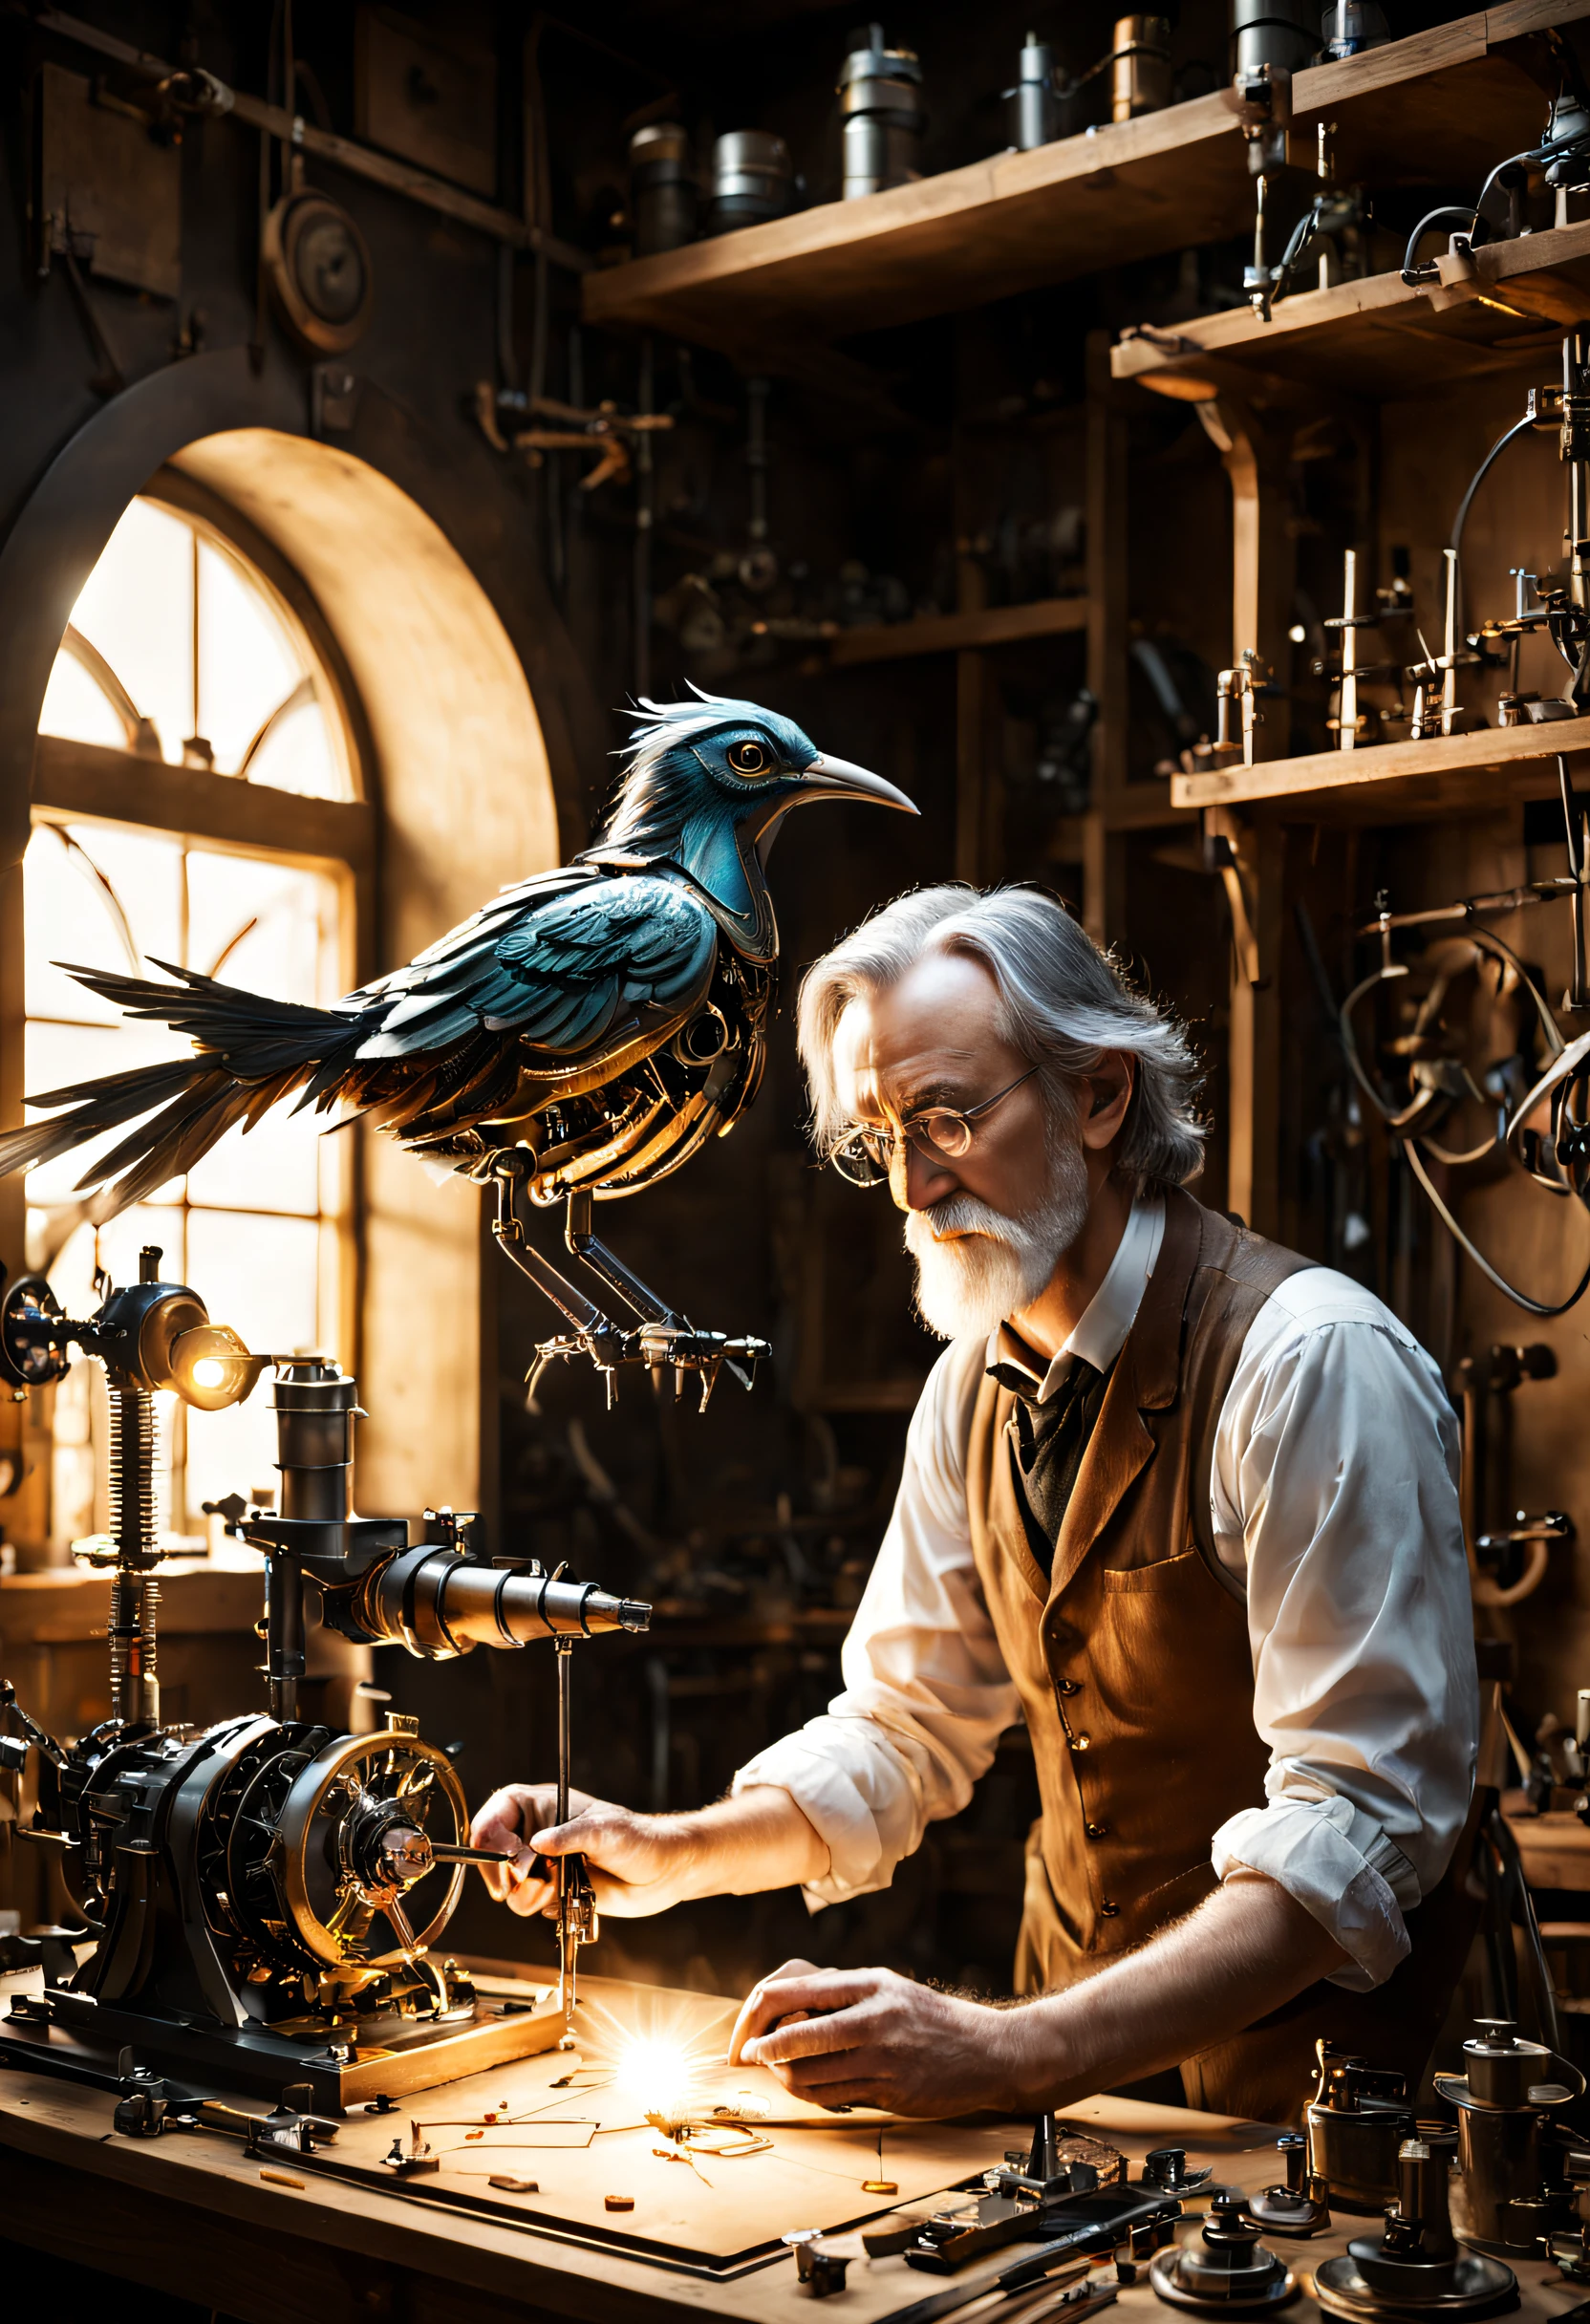 A scientist creating a mechanical bird in a workshop. He is putting the last parts into it. Tolkien-style magical atmosphere.